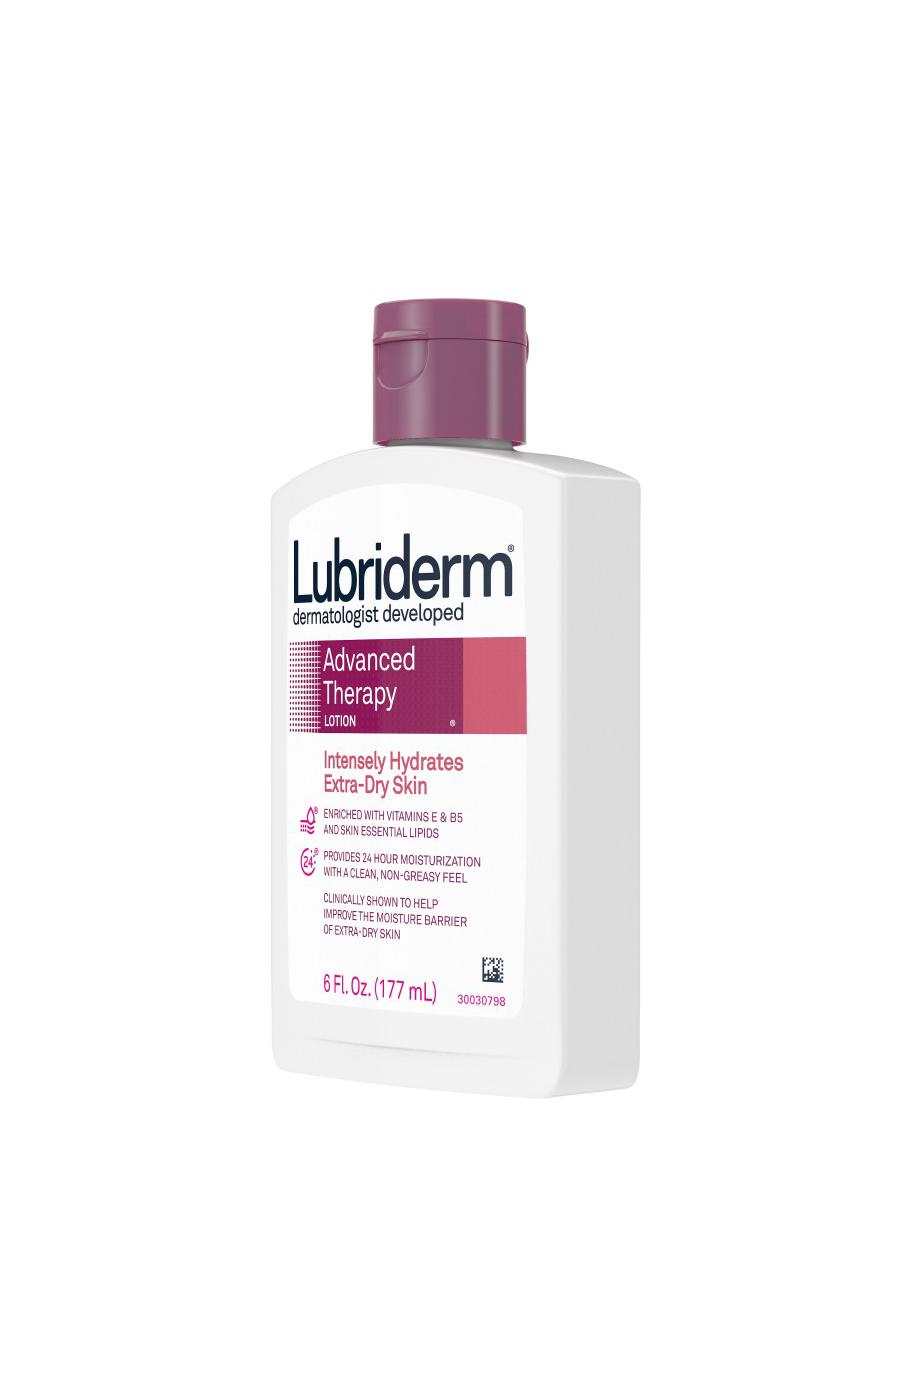 Lubriderm Advanced Therapy Lotion; image 4 of 4